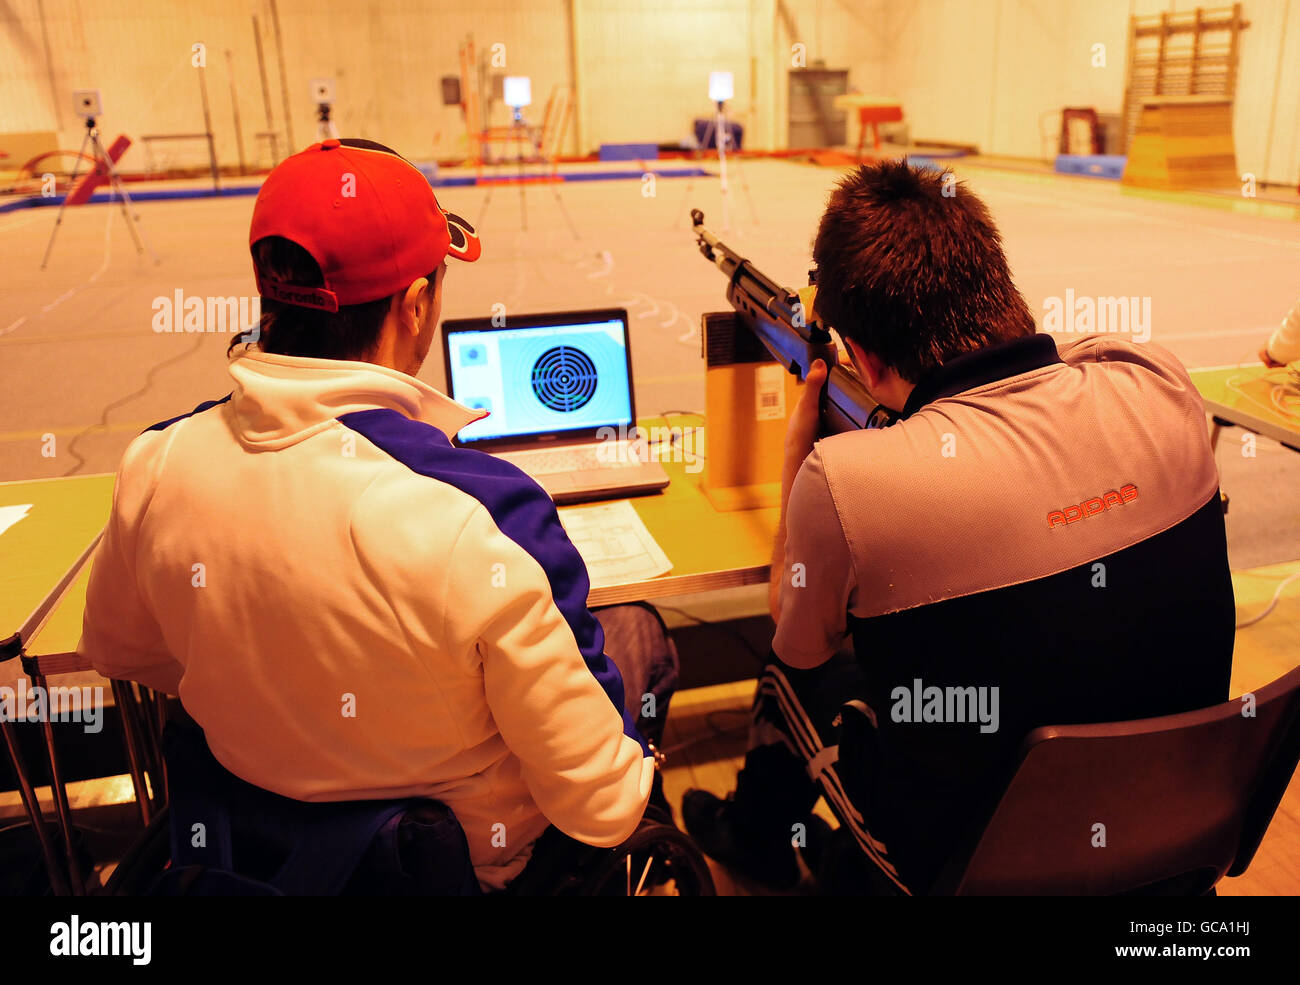 Press Association Journalist Alex Brooker (right) takes part in the Shooting part of the ParalympicsGB London 2012 talent assessment day with Great Britian's Matt Skelhon (left) at the Munrow Sports Centre at the University of Birmingham Stock Photo